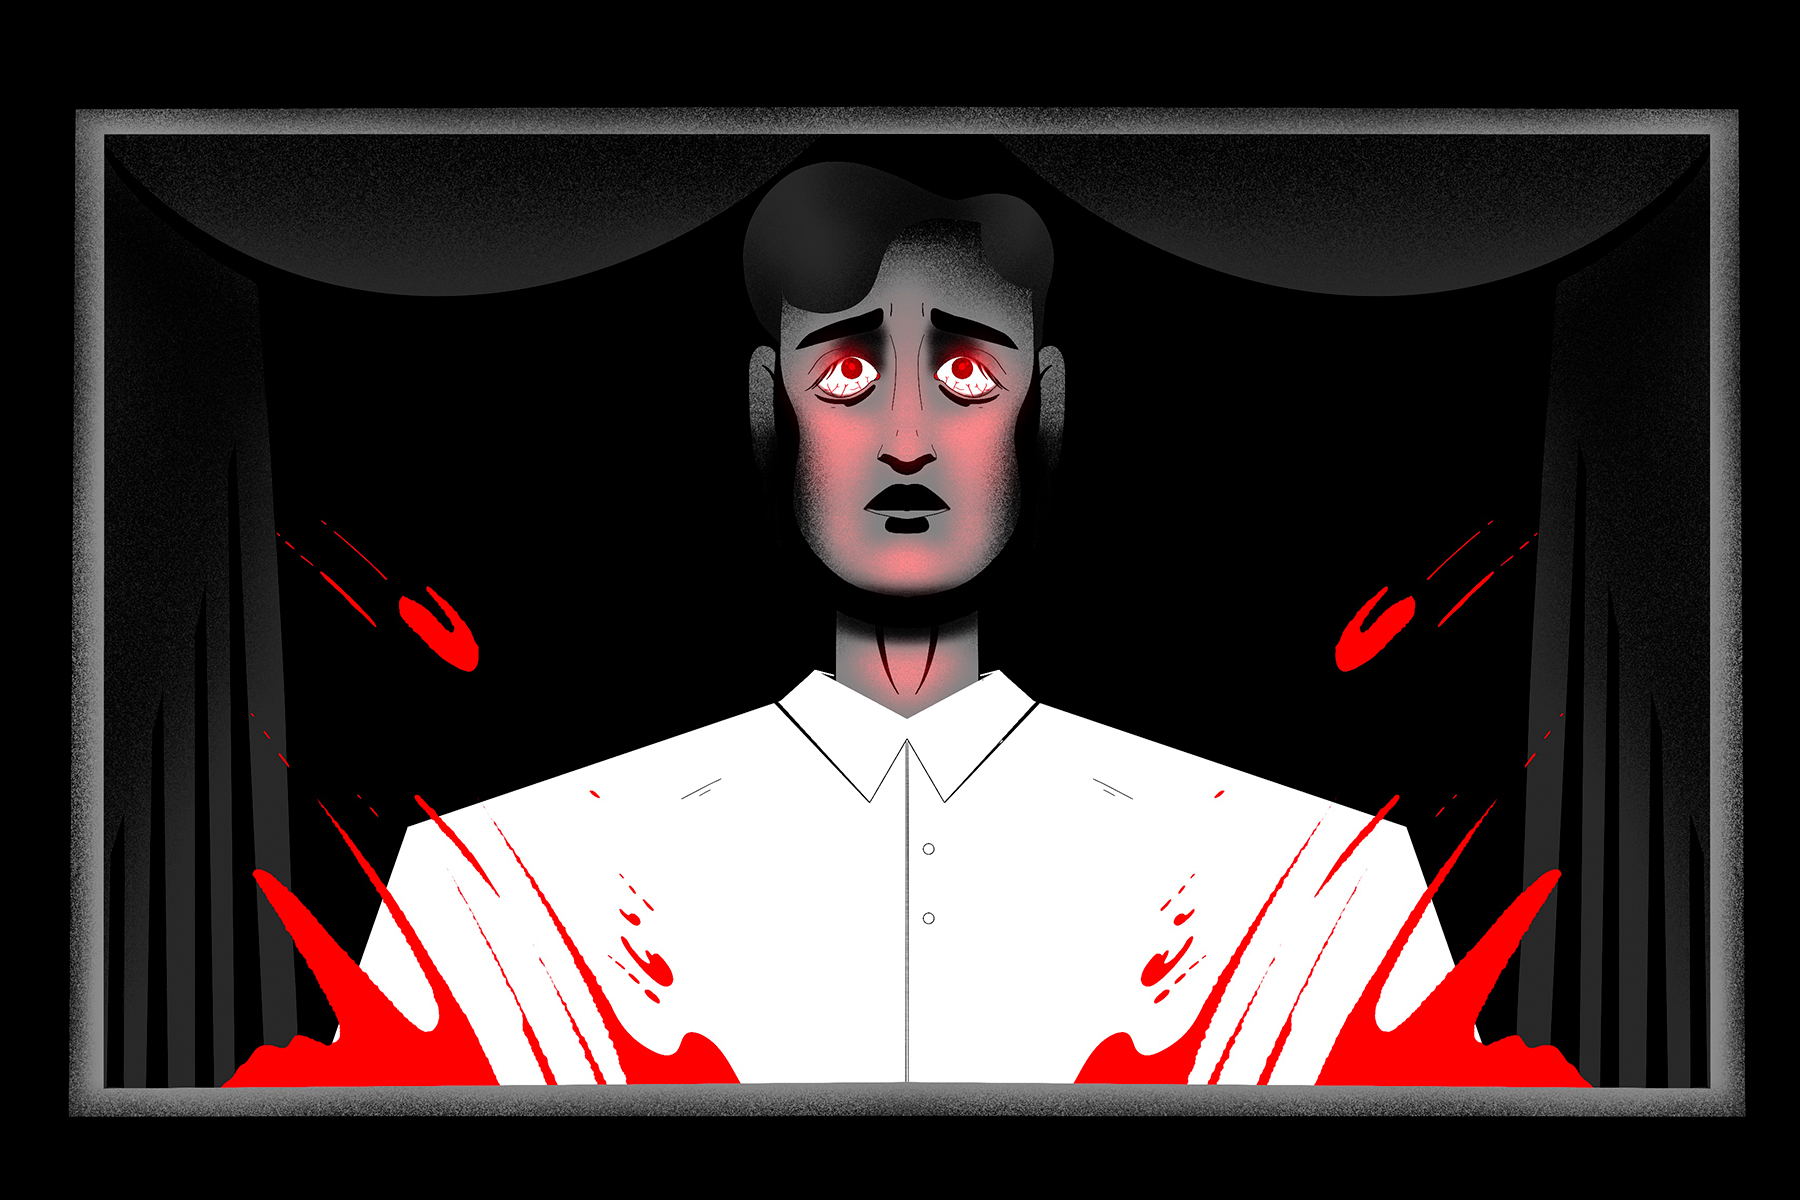 An illustration of a man looking, terrified, out his back window, all in grayscale except his eyes and streak of blood on the glass, both in vivid red.